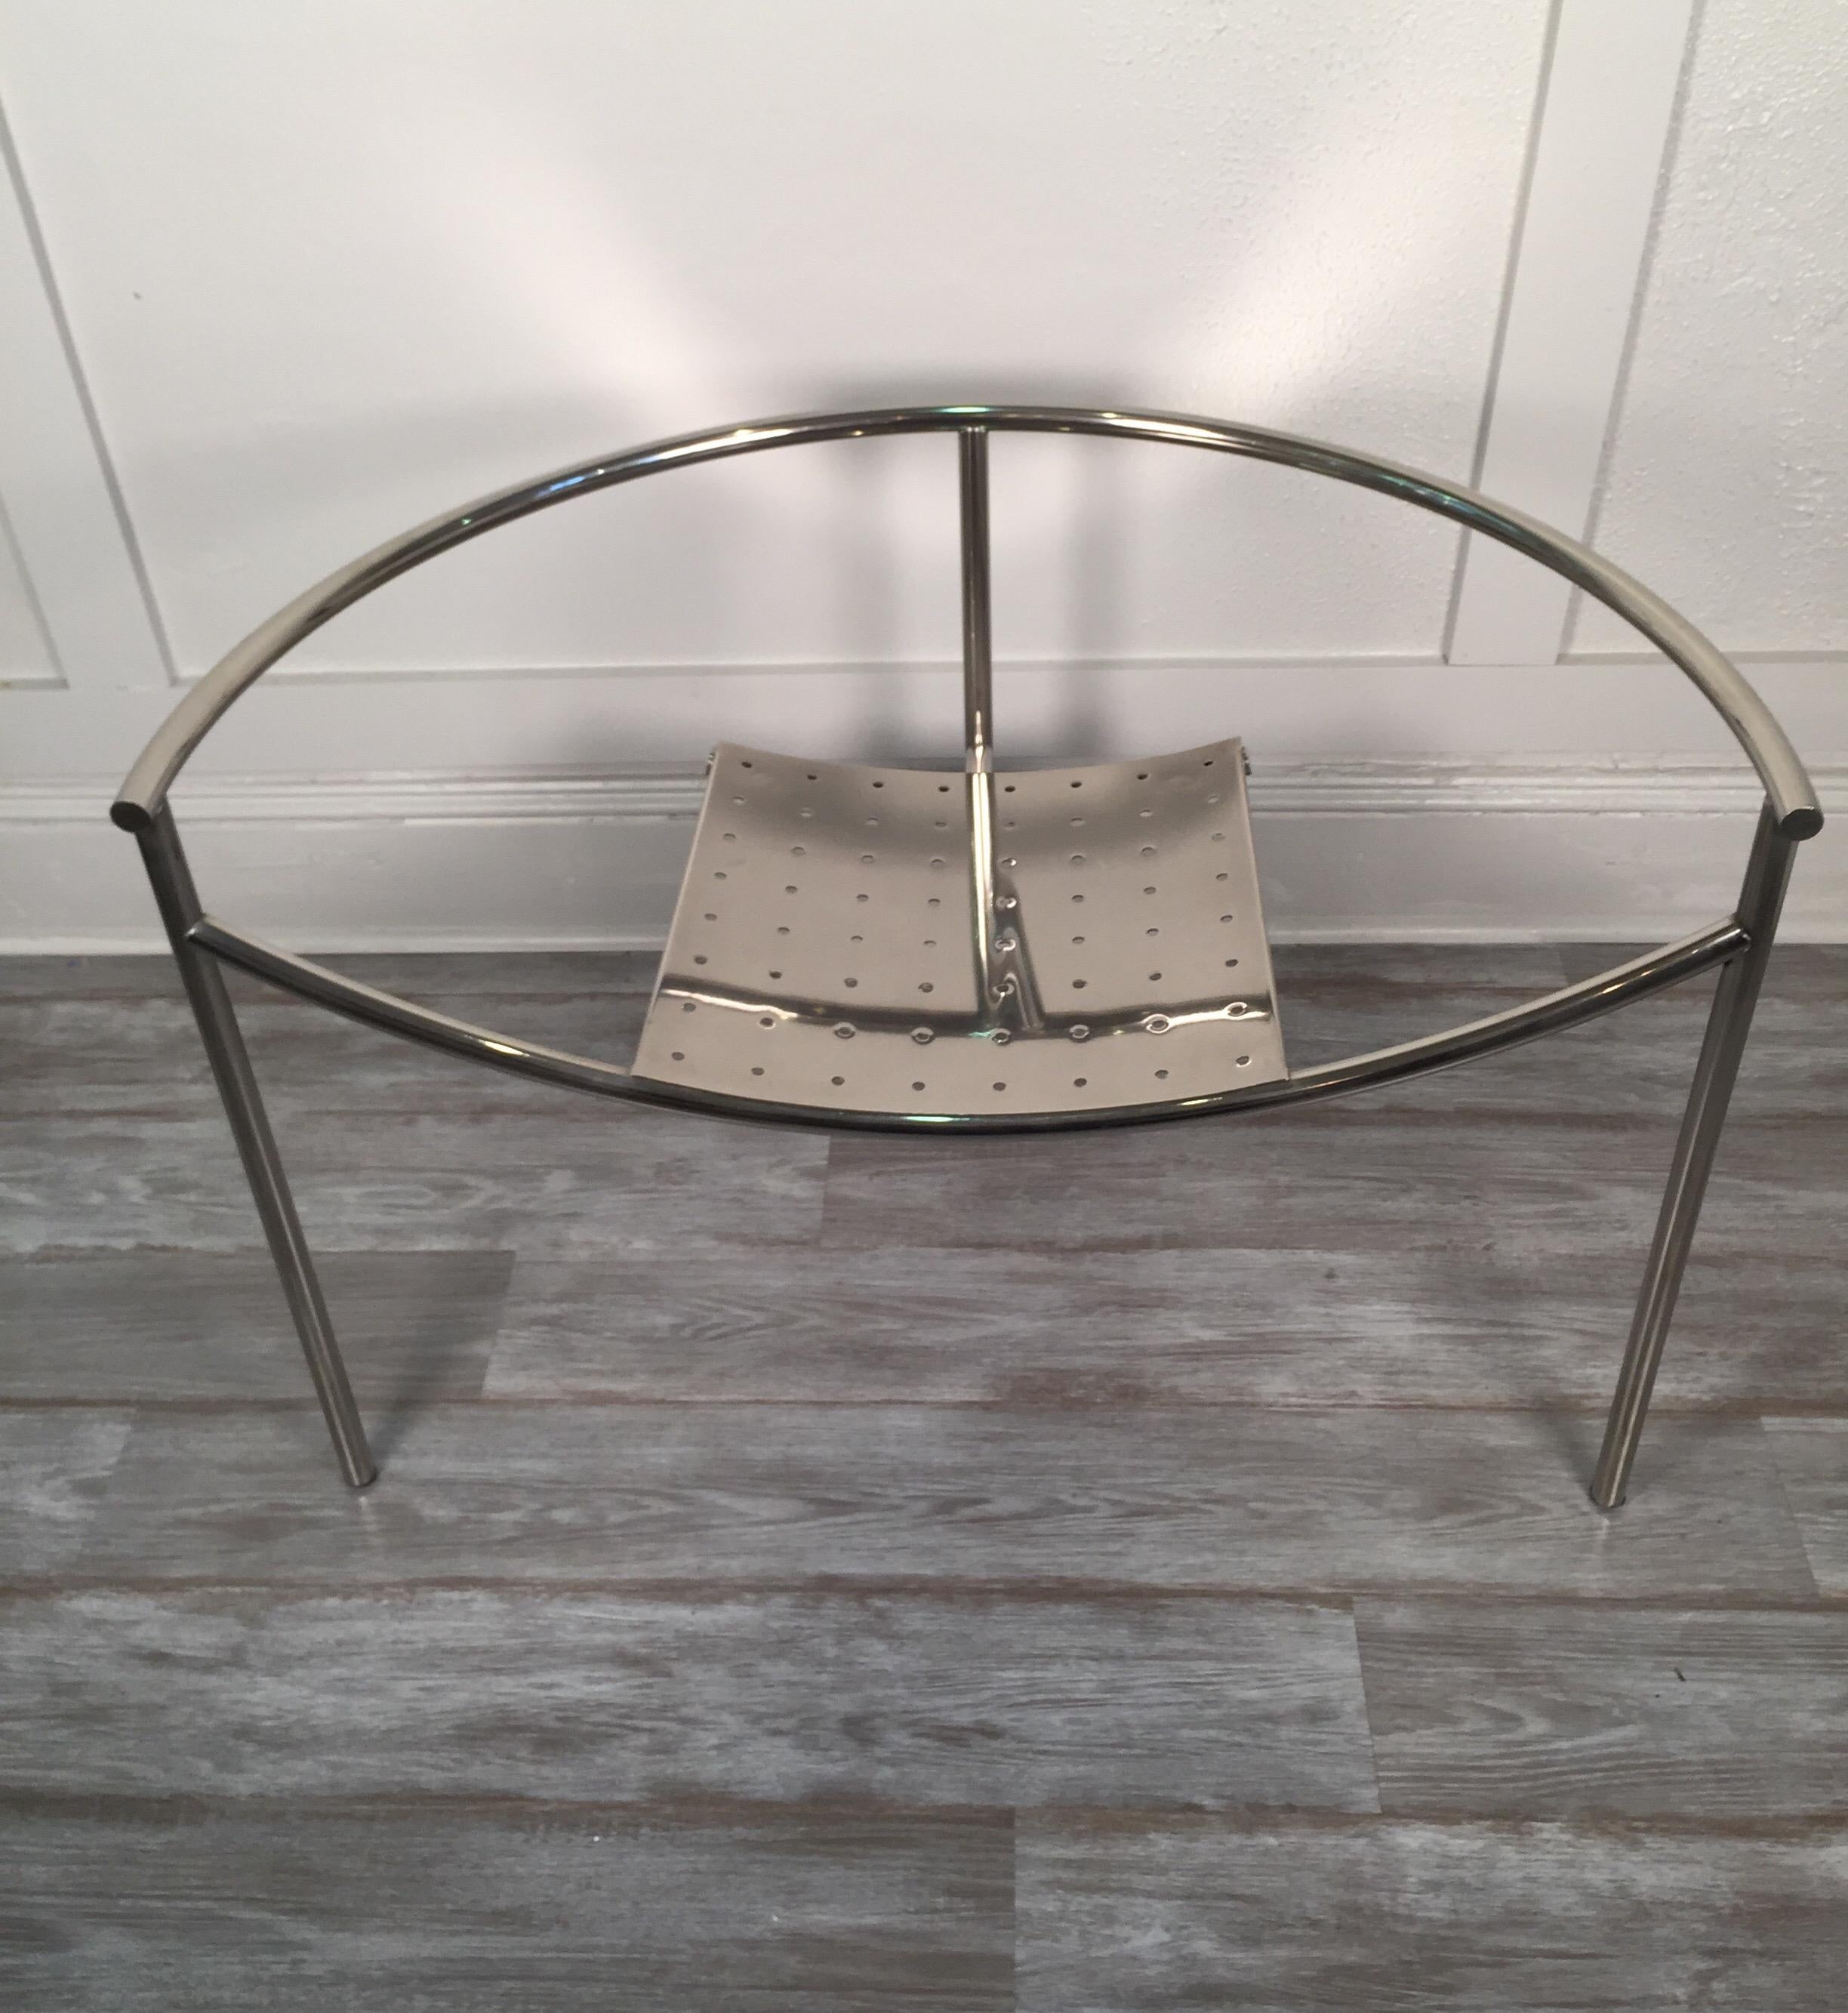 Very early nickel plated Dr Sonderbar chair by Philippe Starck. One owner, in pristine original condition; truly memorable.